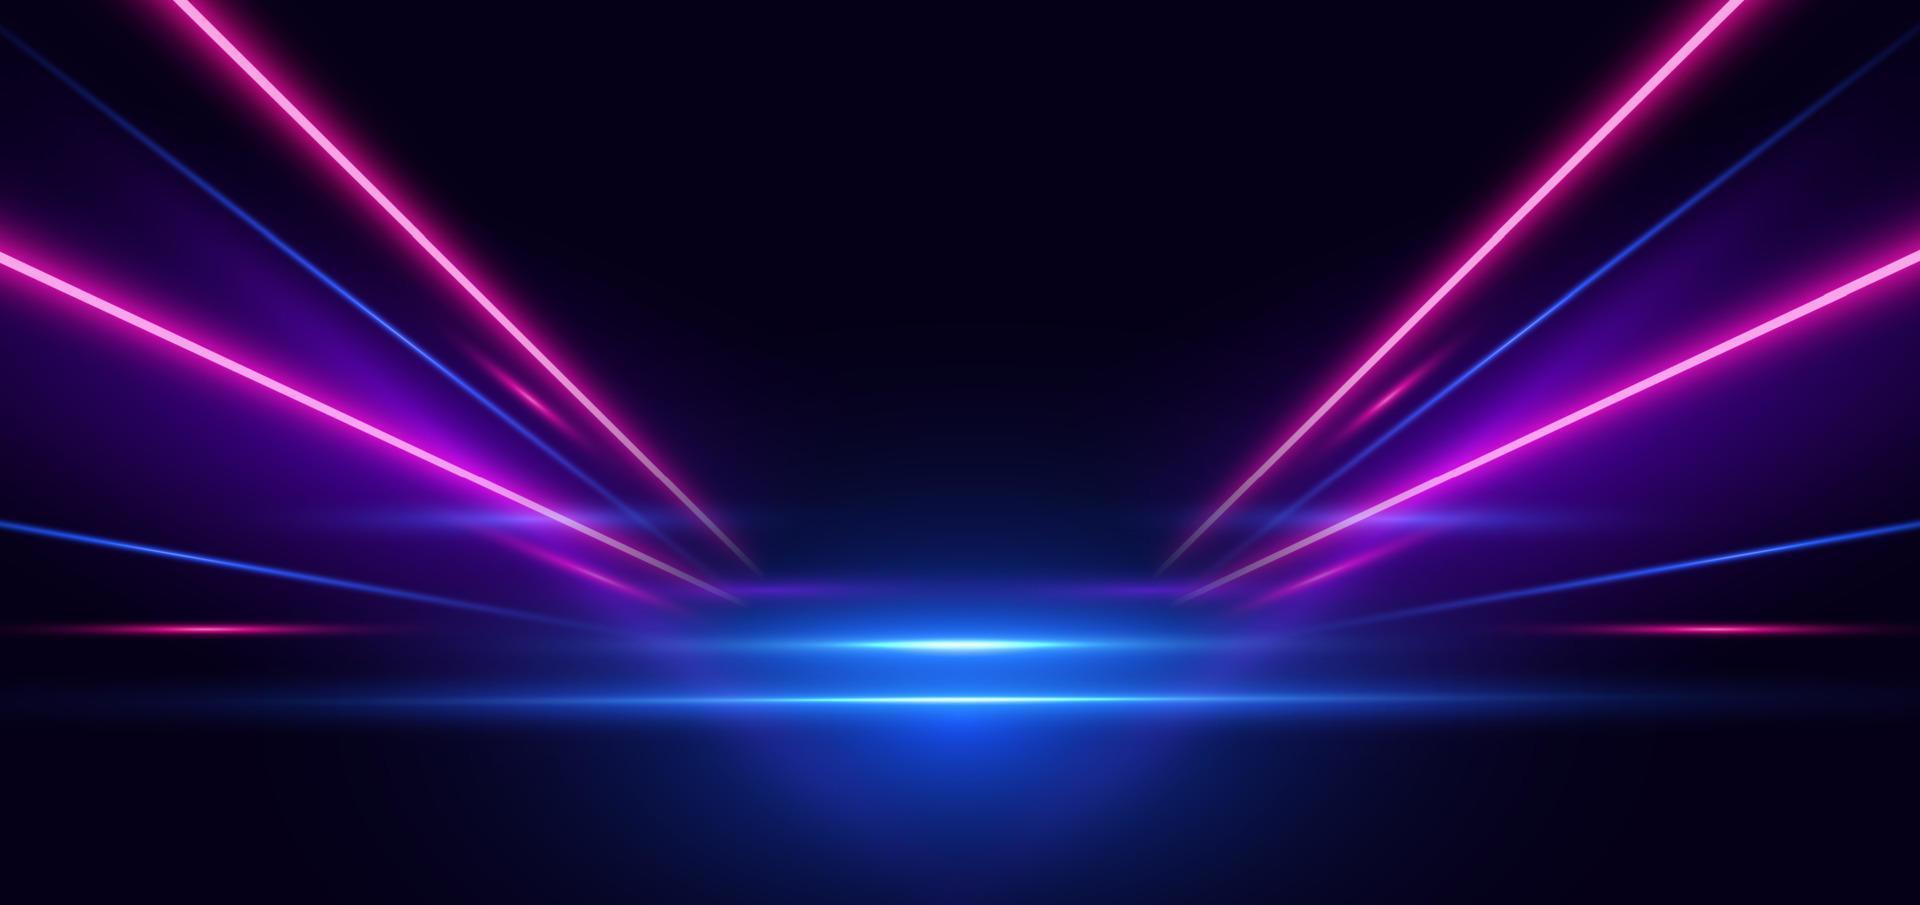 Abstract technology futuristic glowing neon blue and pink light lines with speed motion movingon dark blue background. vector